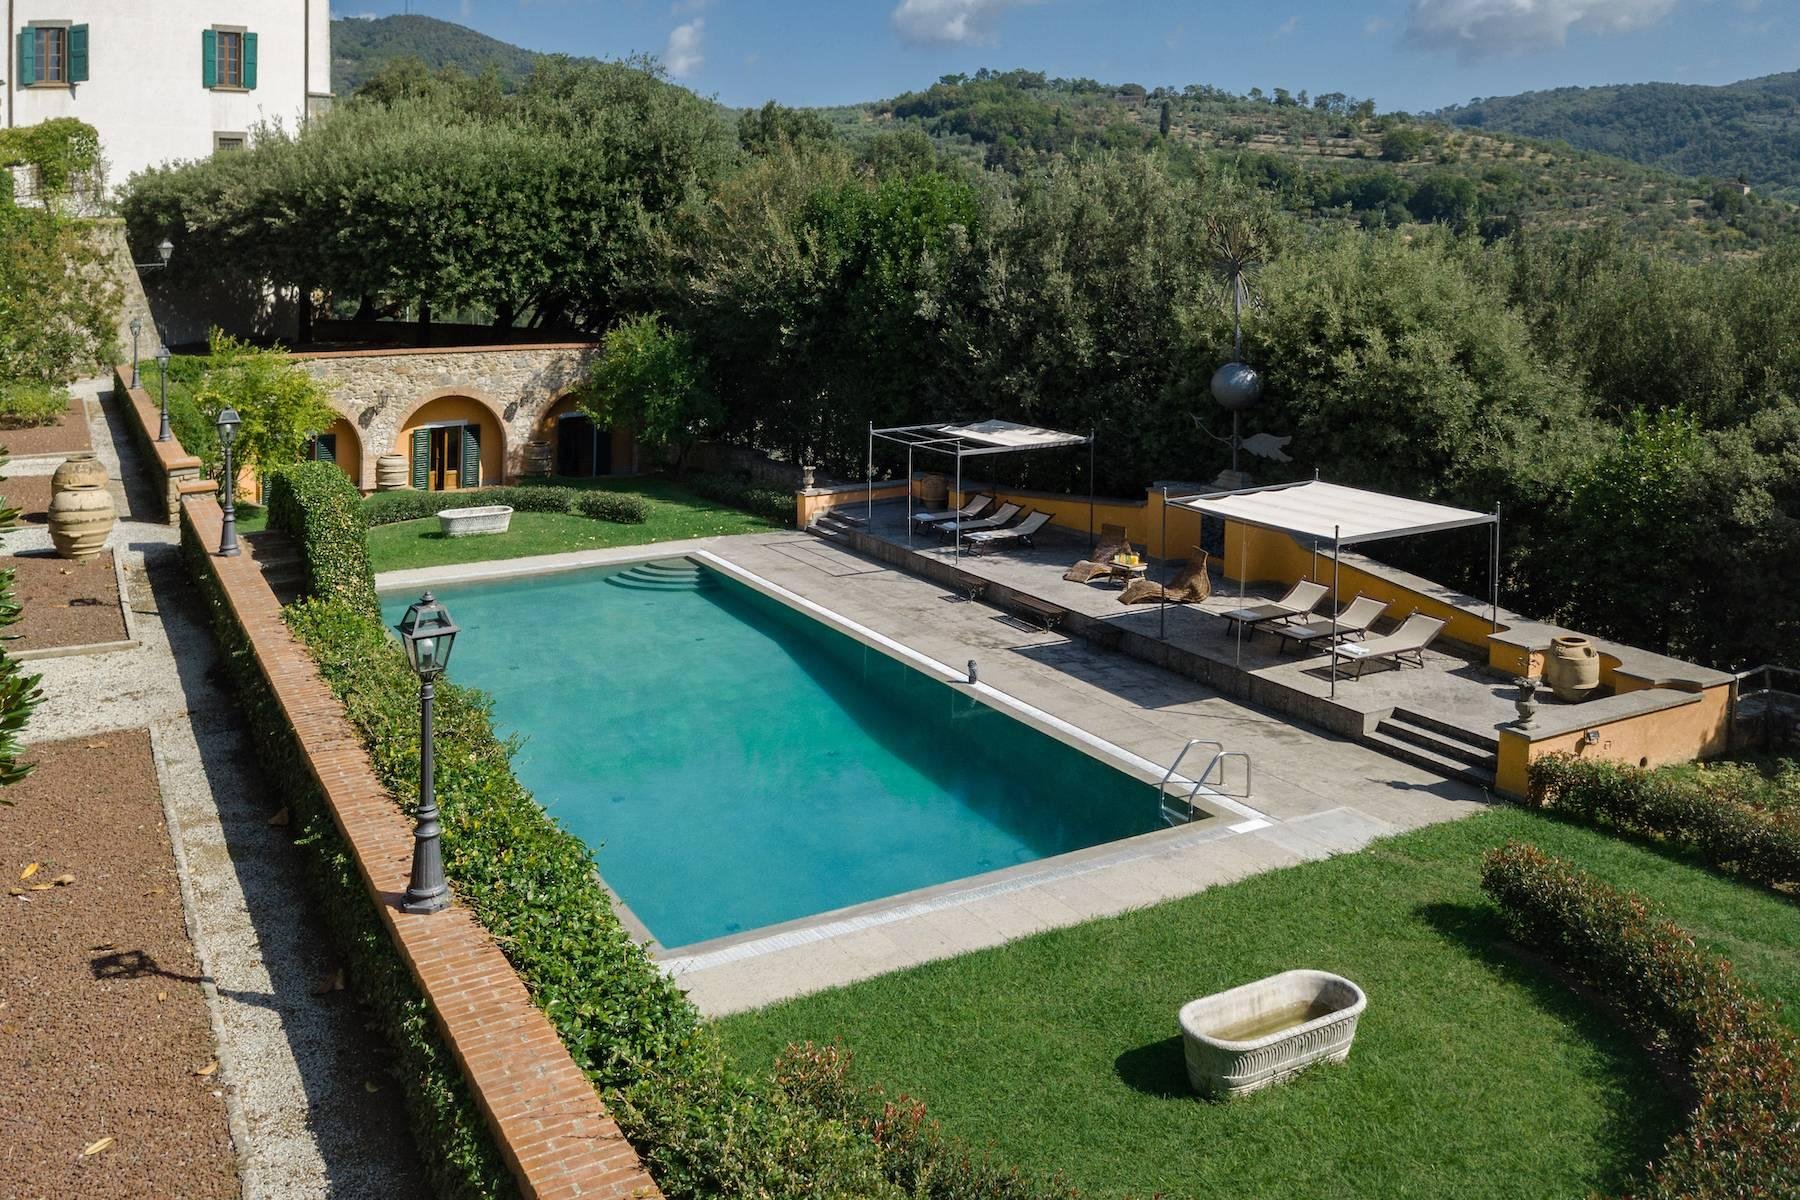 Francis York  Tuscan Villa Owned by Italian Aristocracy Available to Book as a Luxury Villa Rental 16.jpg